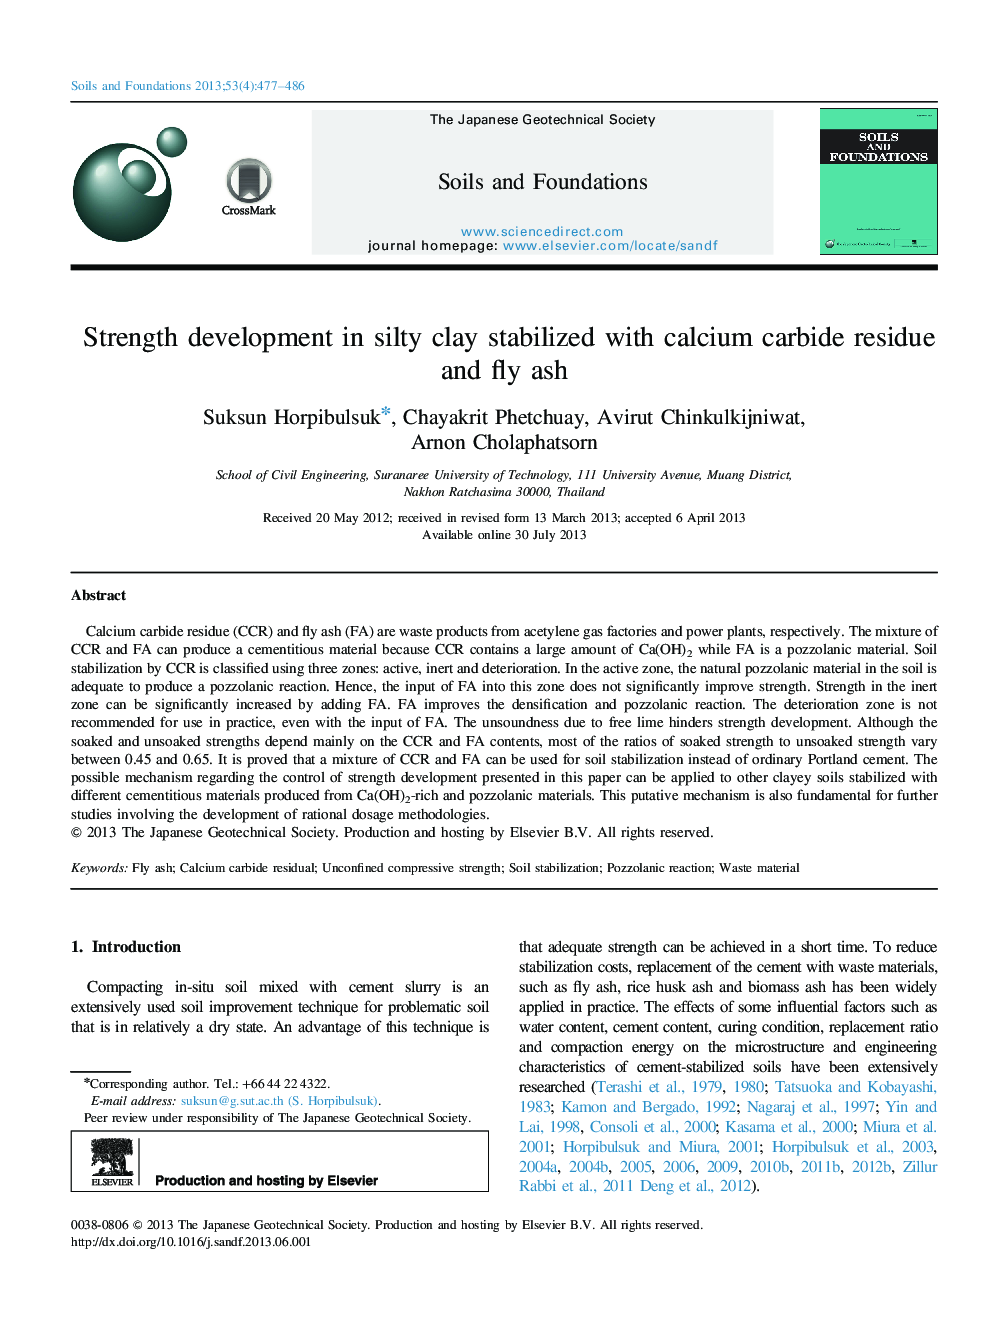 Strength development in silty clay stabilized with calcium carbide residue and fly ash 